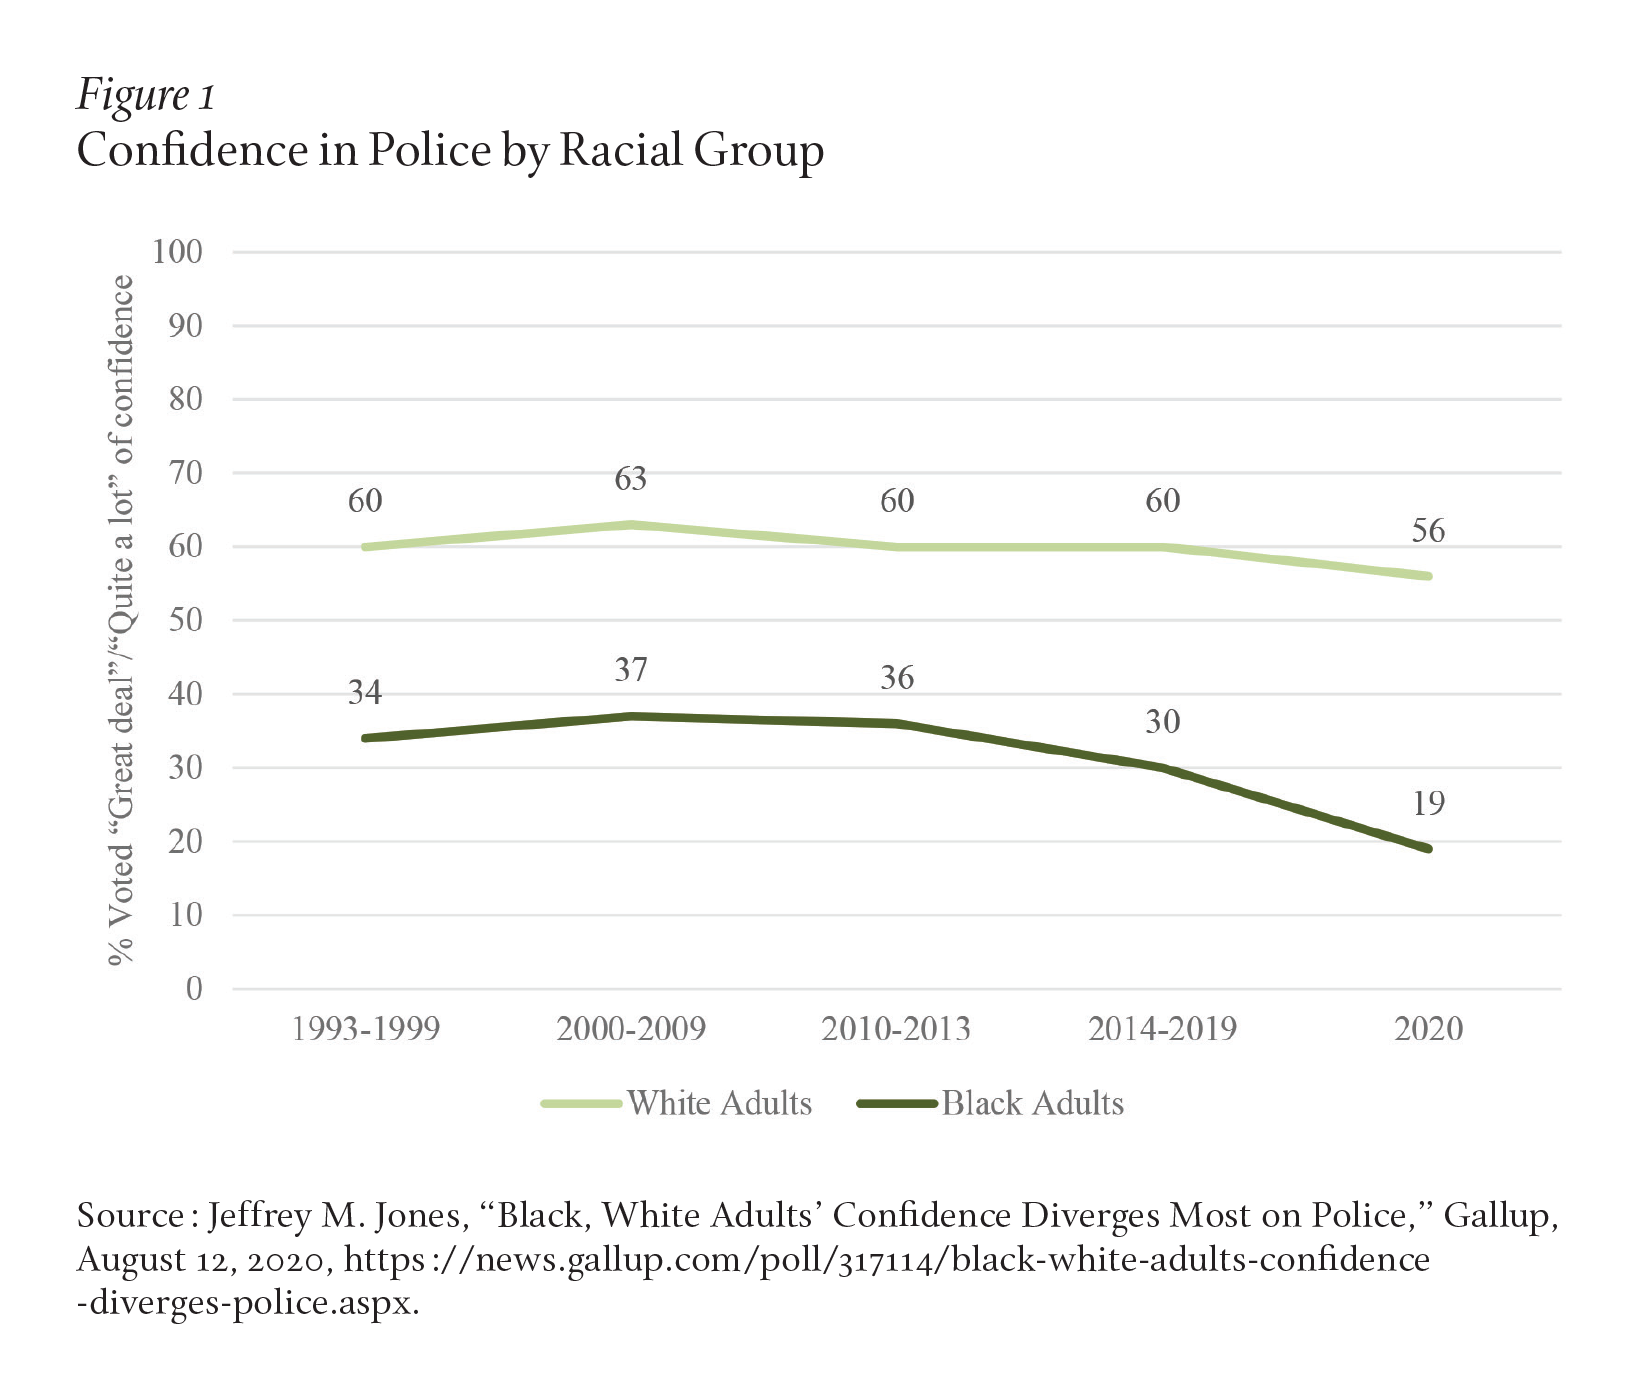 Figure 1 shows that White adults' confidence in police ("great deal" or "quite a lot" of confidence) has stayed relatively stable since 1993, between 63 and 56 percent, while Black adults' confidence has been much lower, topping out at 37% and sitting at 19% in 2020. See Jeffrey M. Jones, “Black, White Adults’ Confidence Diverges Most on Police,” Gallup, August 12, 2020.